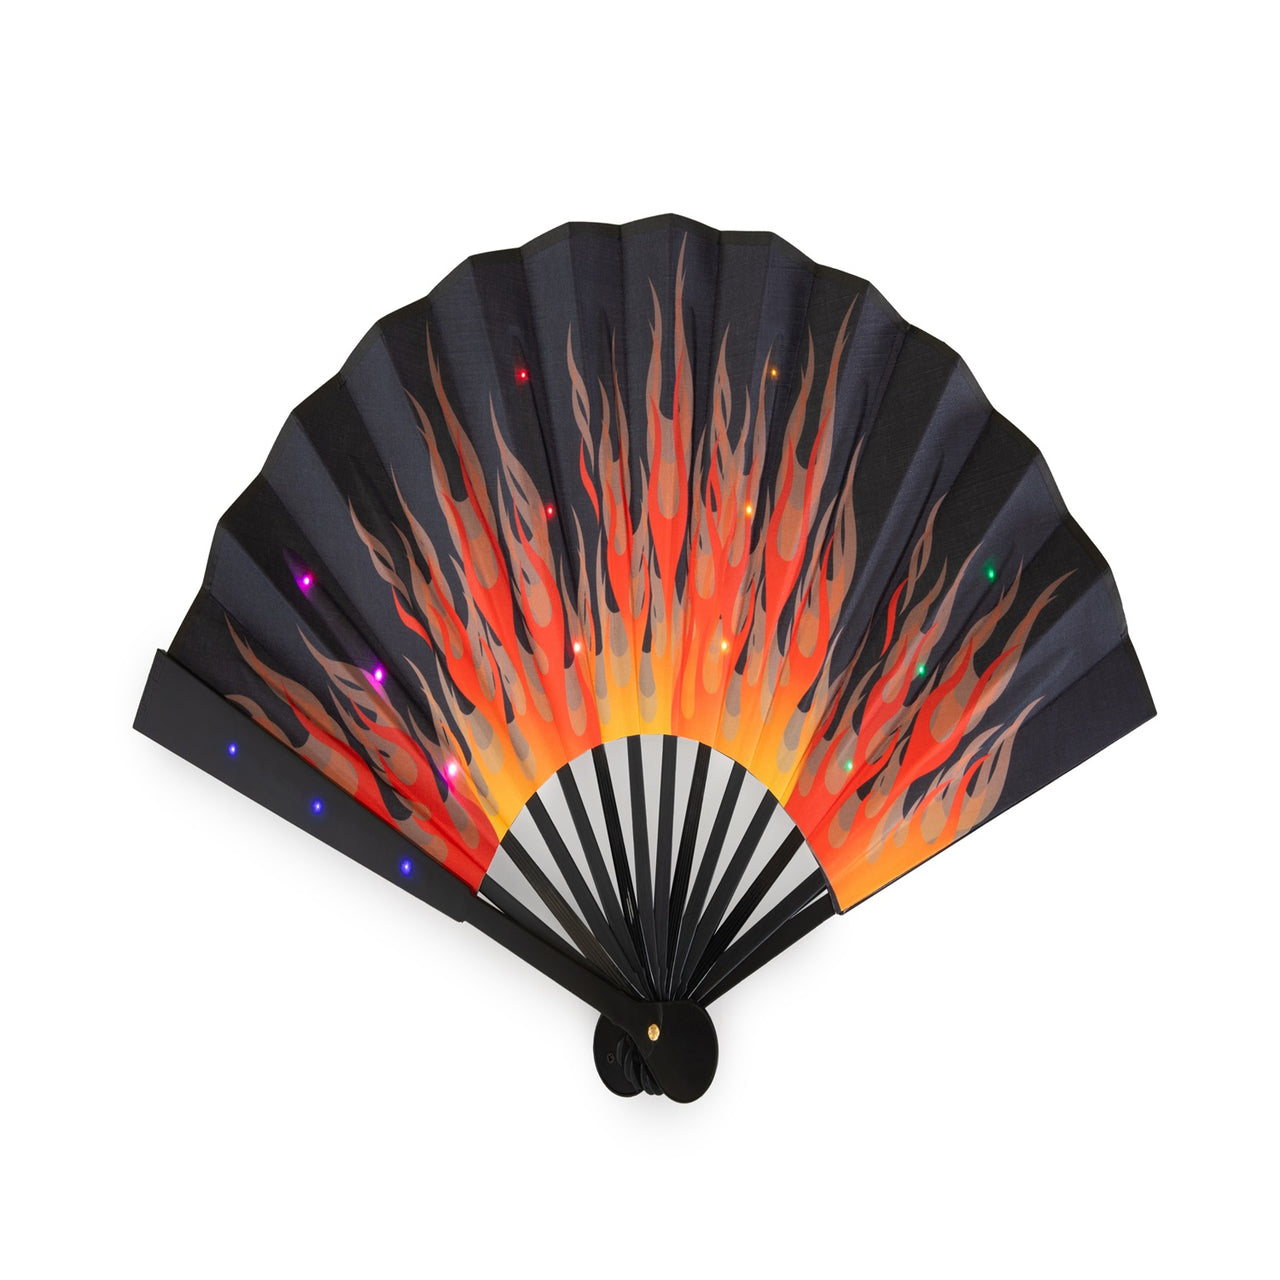 LED Hand Fan - "Flames" Bold Flamin Hot Design, Ready to Heat up the Night